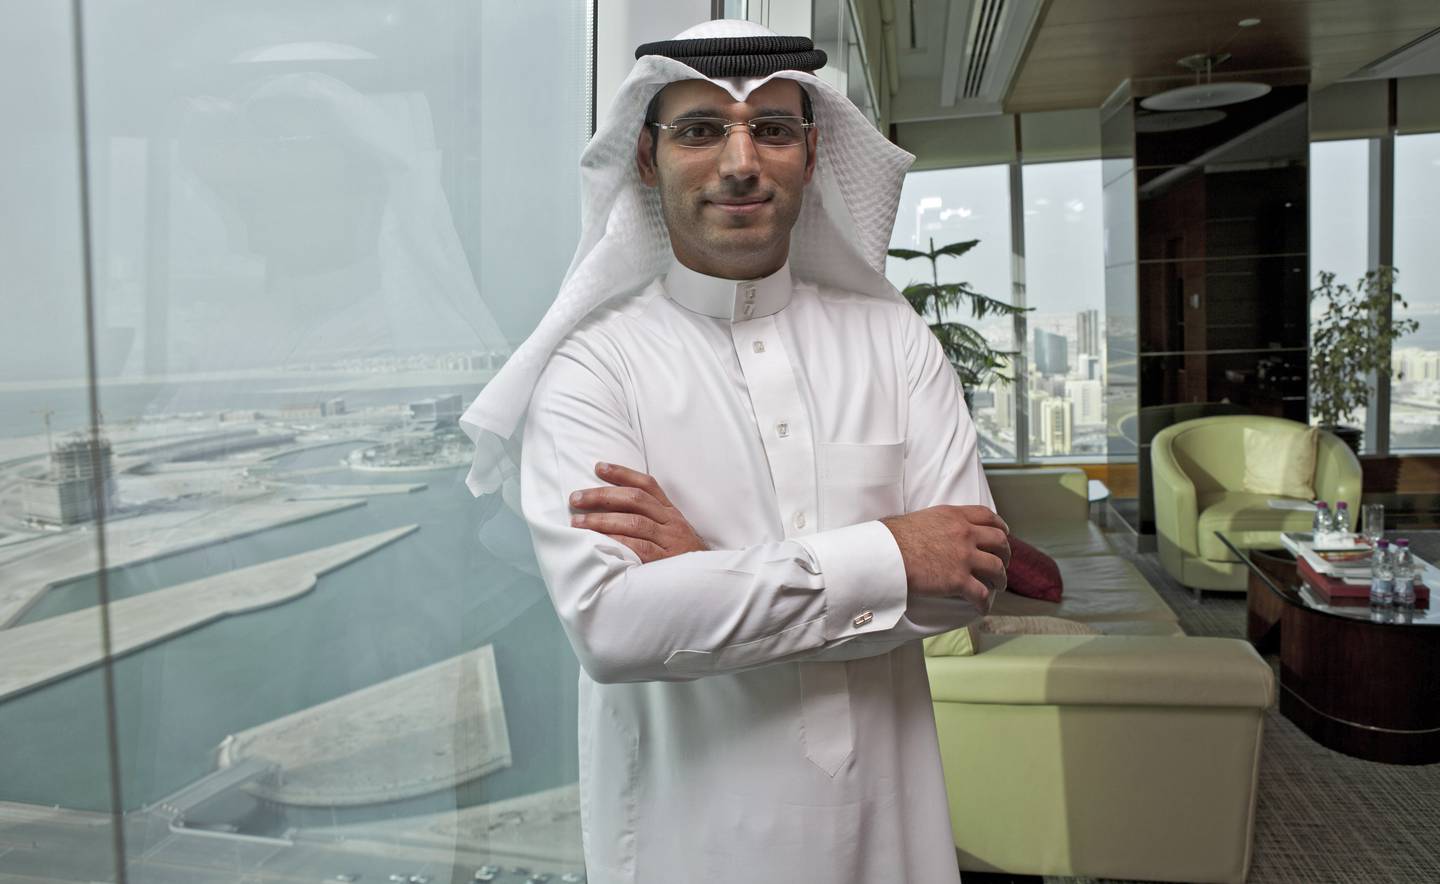 Manama, Bahrain, May 21 2012 - Hisham Alrayes, Acting Chief Executive Officer for Gulf Finance House, poses for a portrait in his office at Bahrain Financial Harbour. GFH, a Bahrain-based islamic investment bank just announced a restructuring of their bonds. (Razan Alzayani / The National)